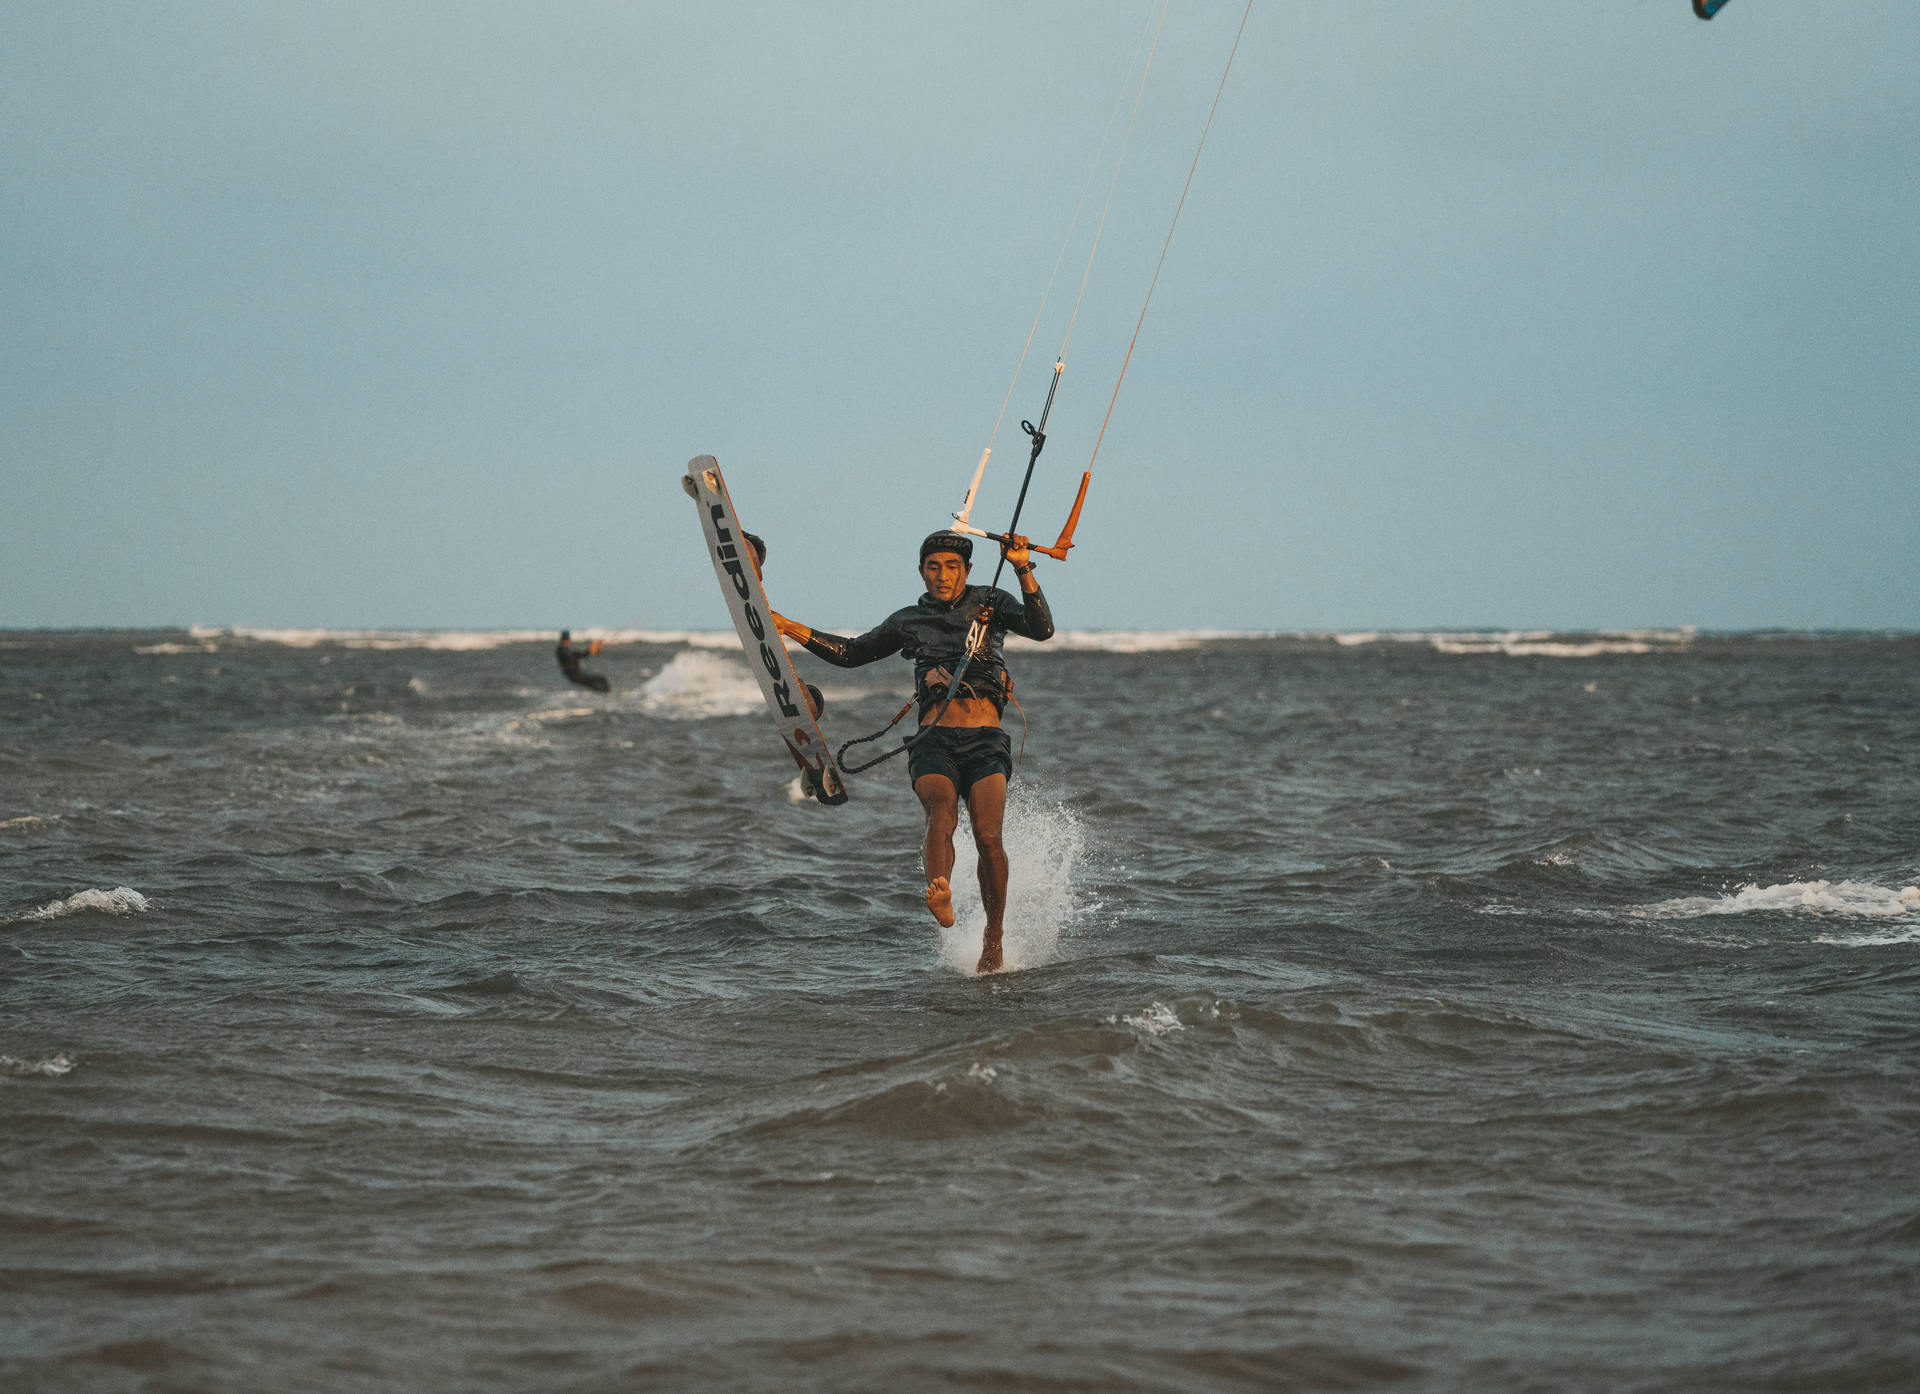 Windsurfing And Walking In Ocean Background